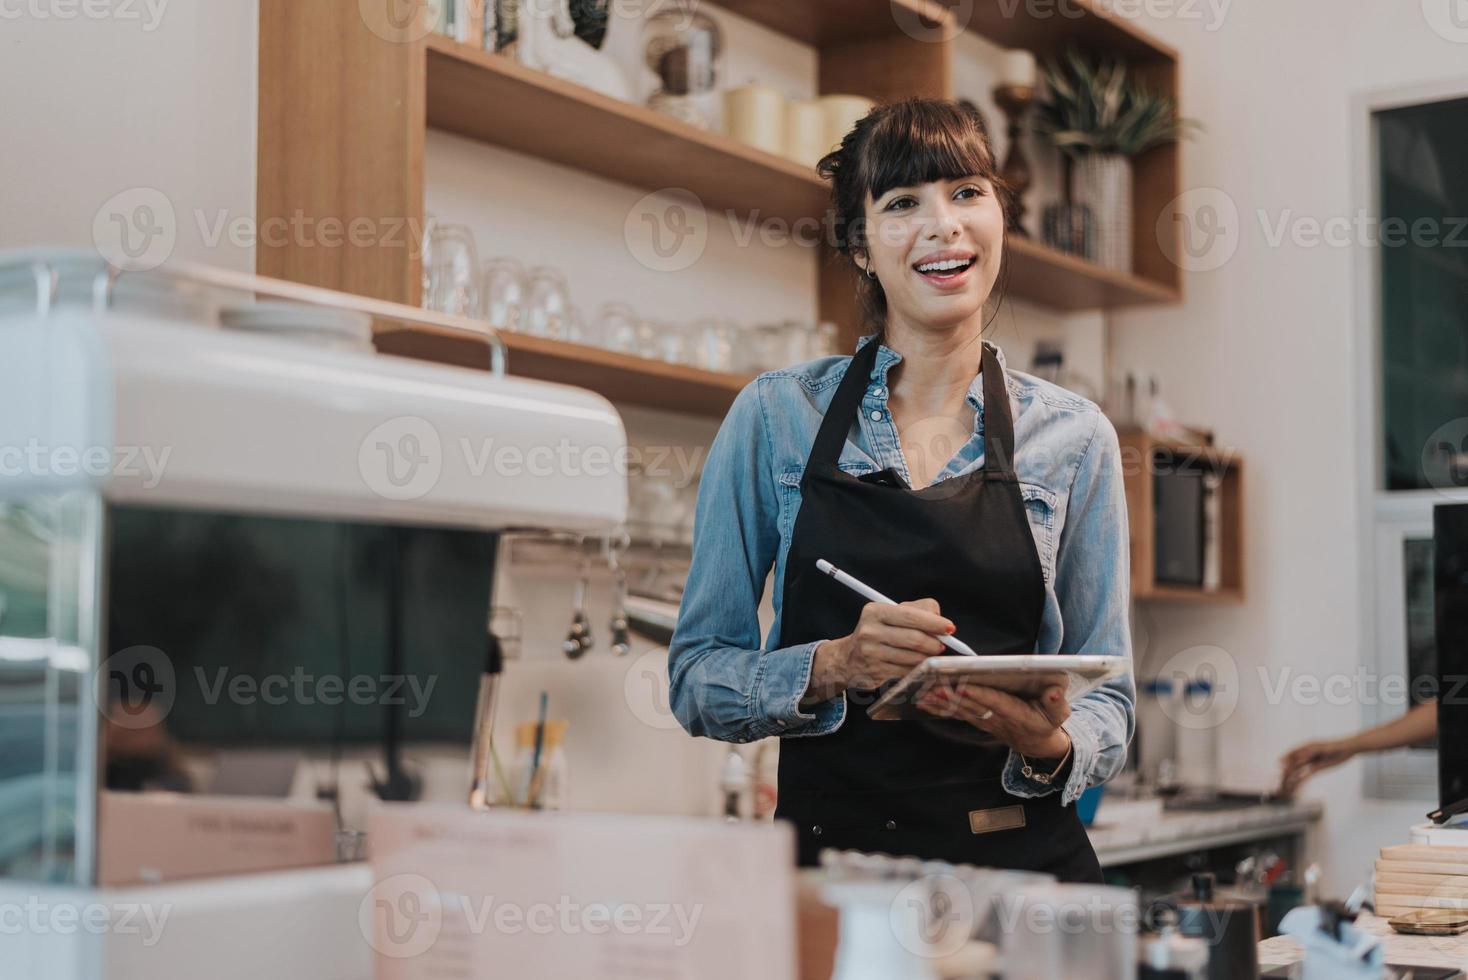 Happy woman coffee owner standing behind the counter of a coffee shop. female barista standing and holding digital tablet behind counter in cafe. Business owner concept. photo